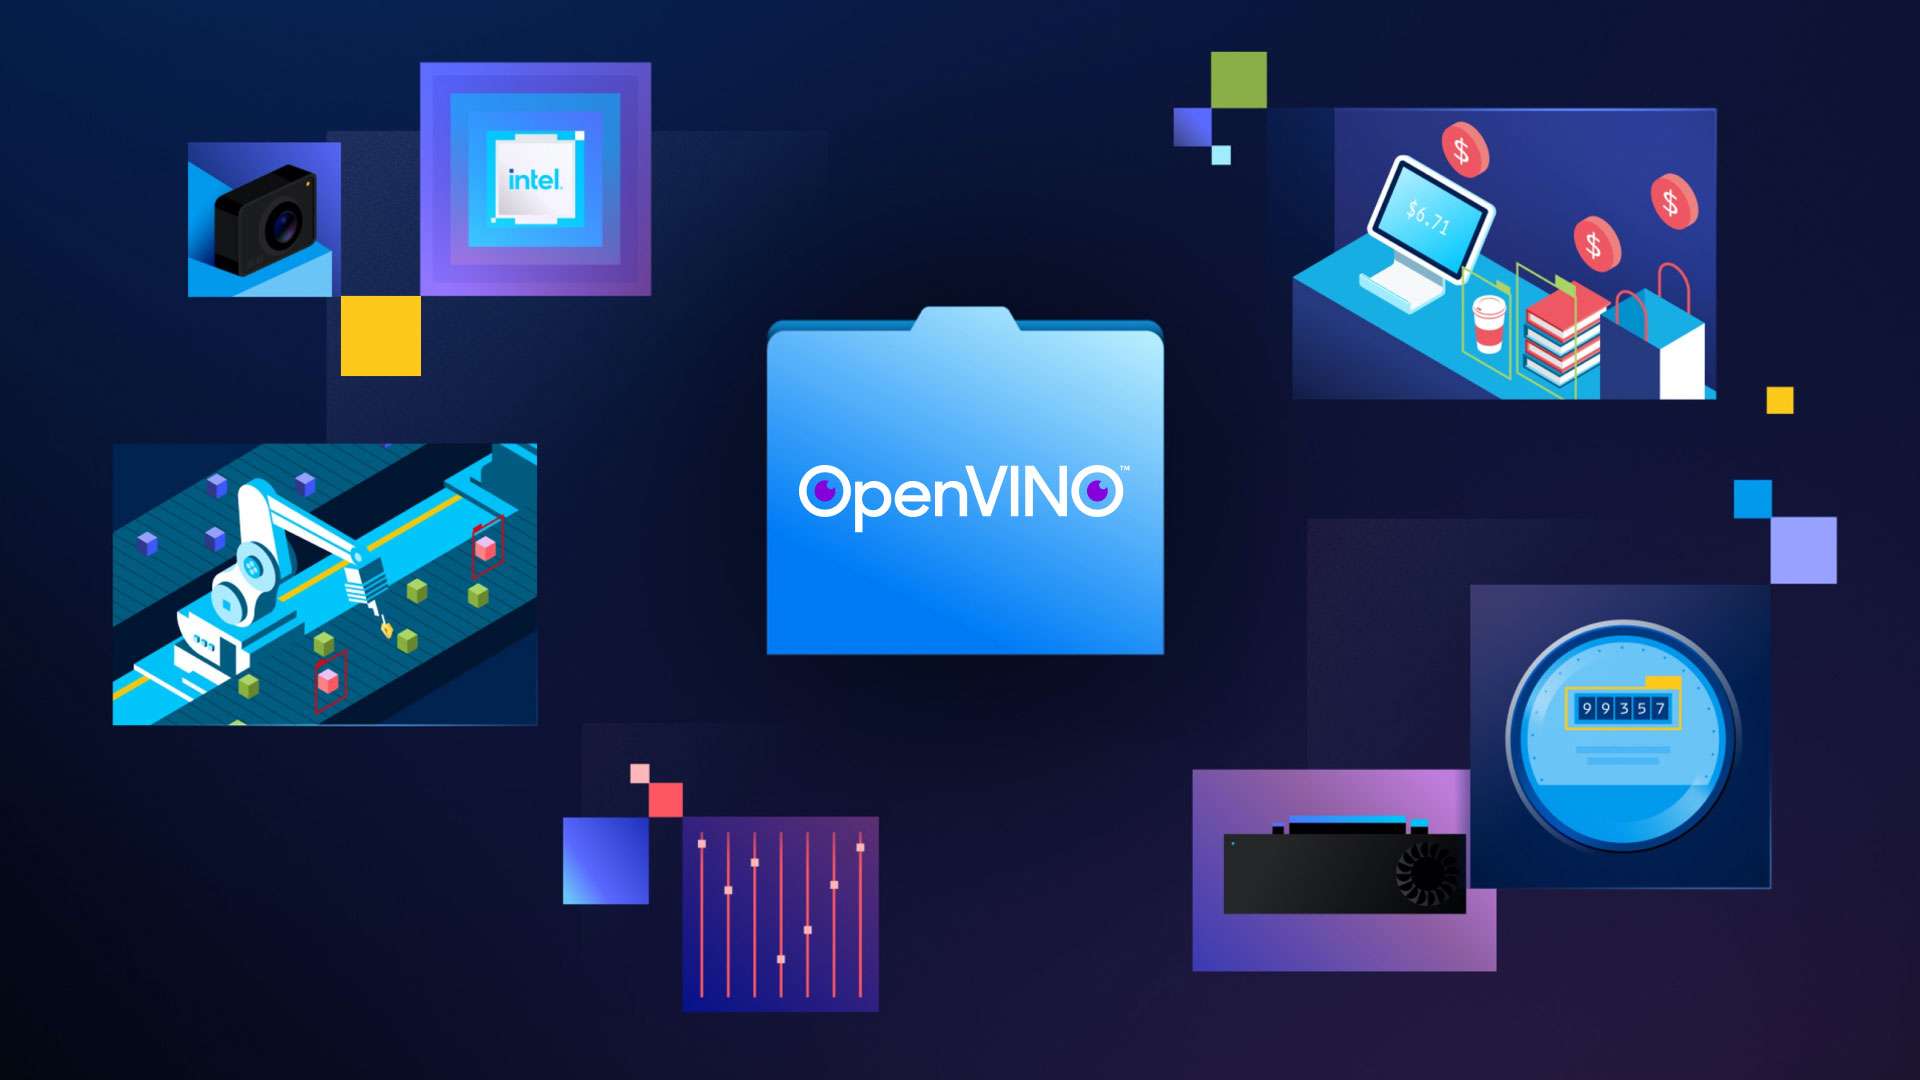 Deploy AI Apps with Intel OpenVINO